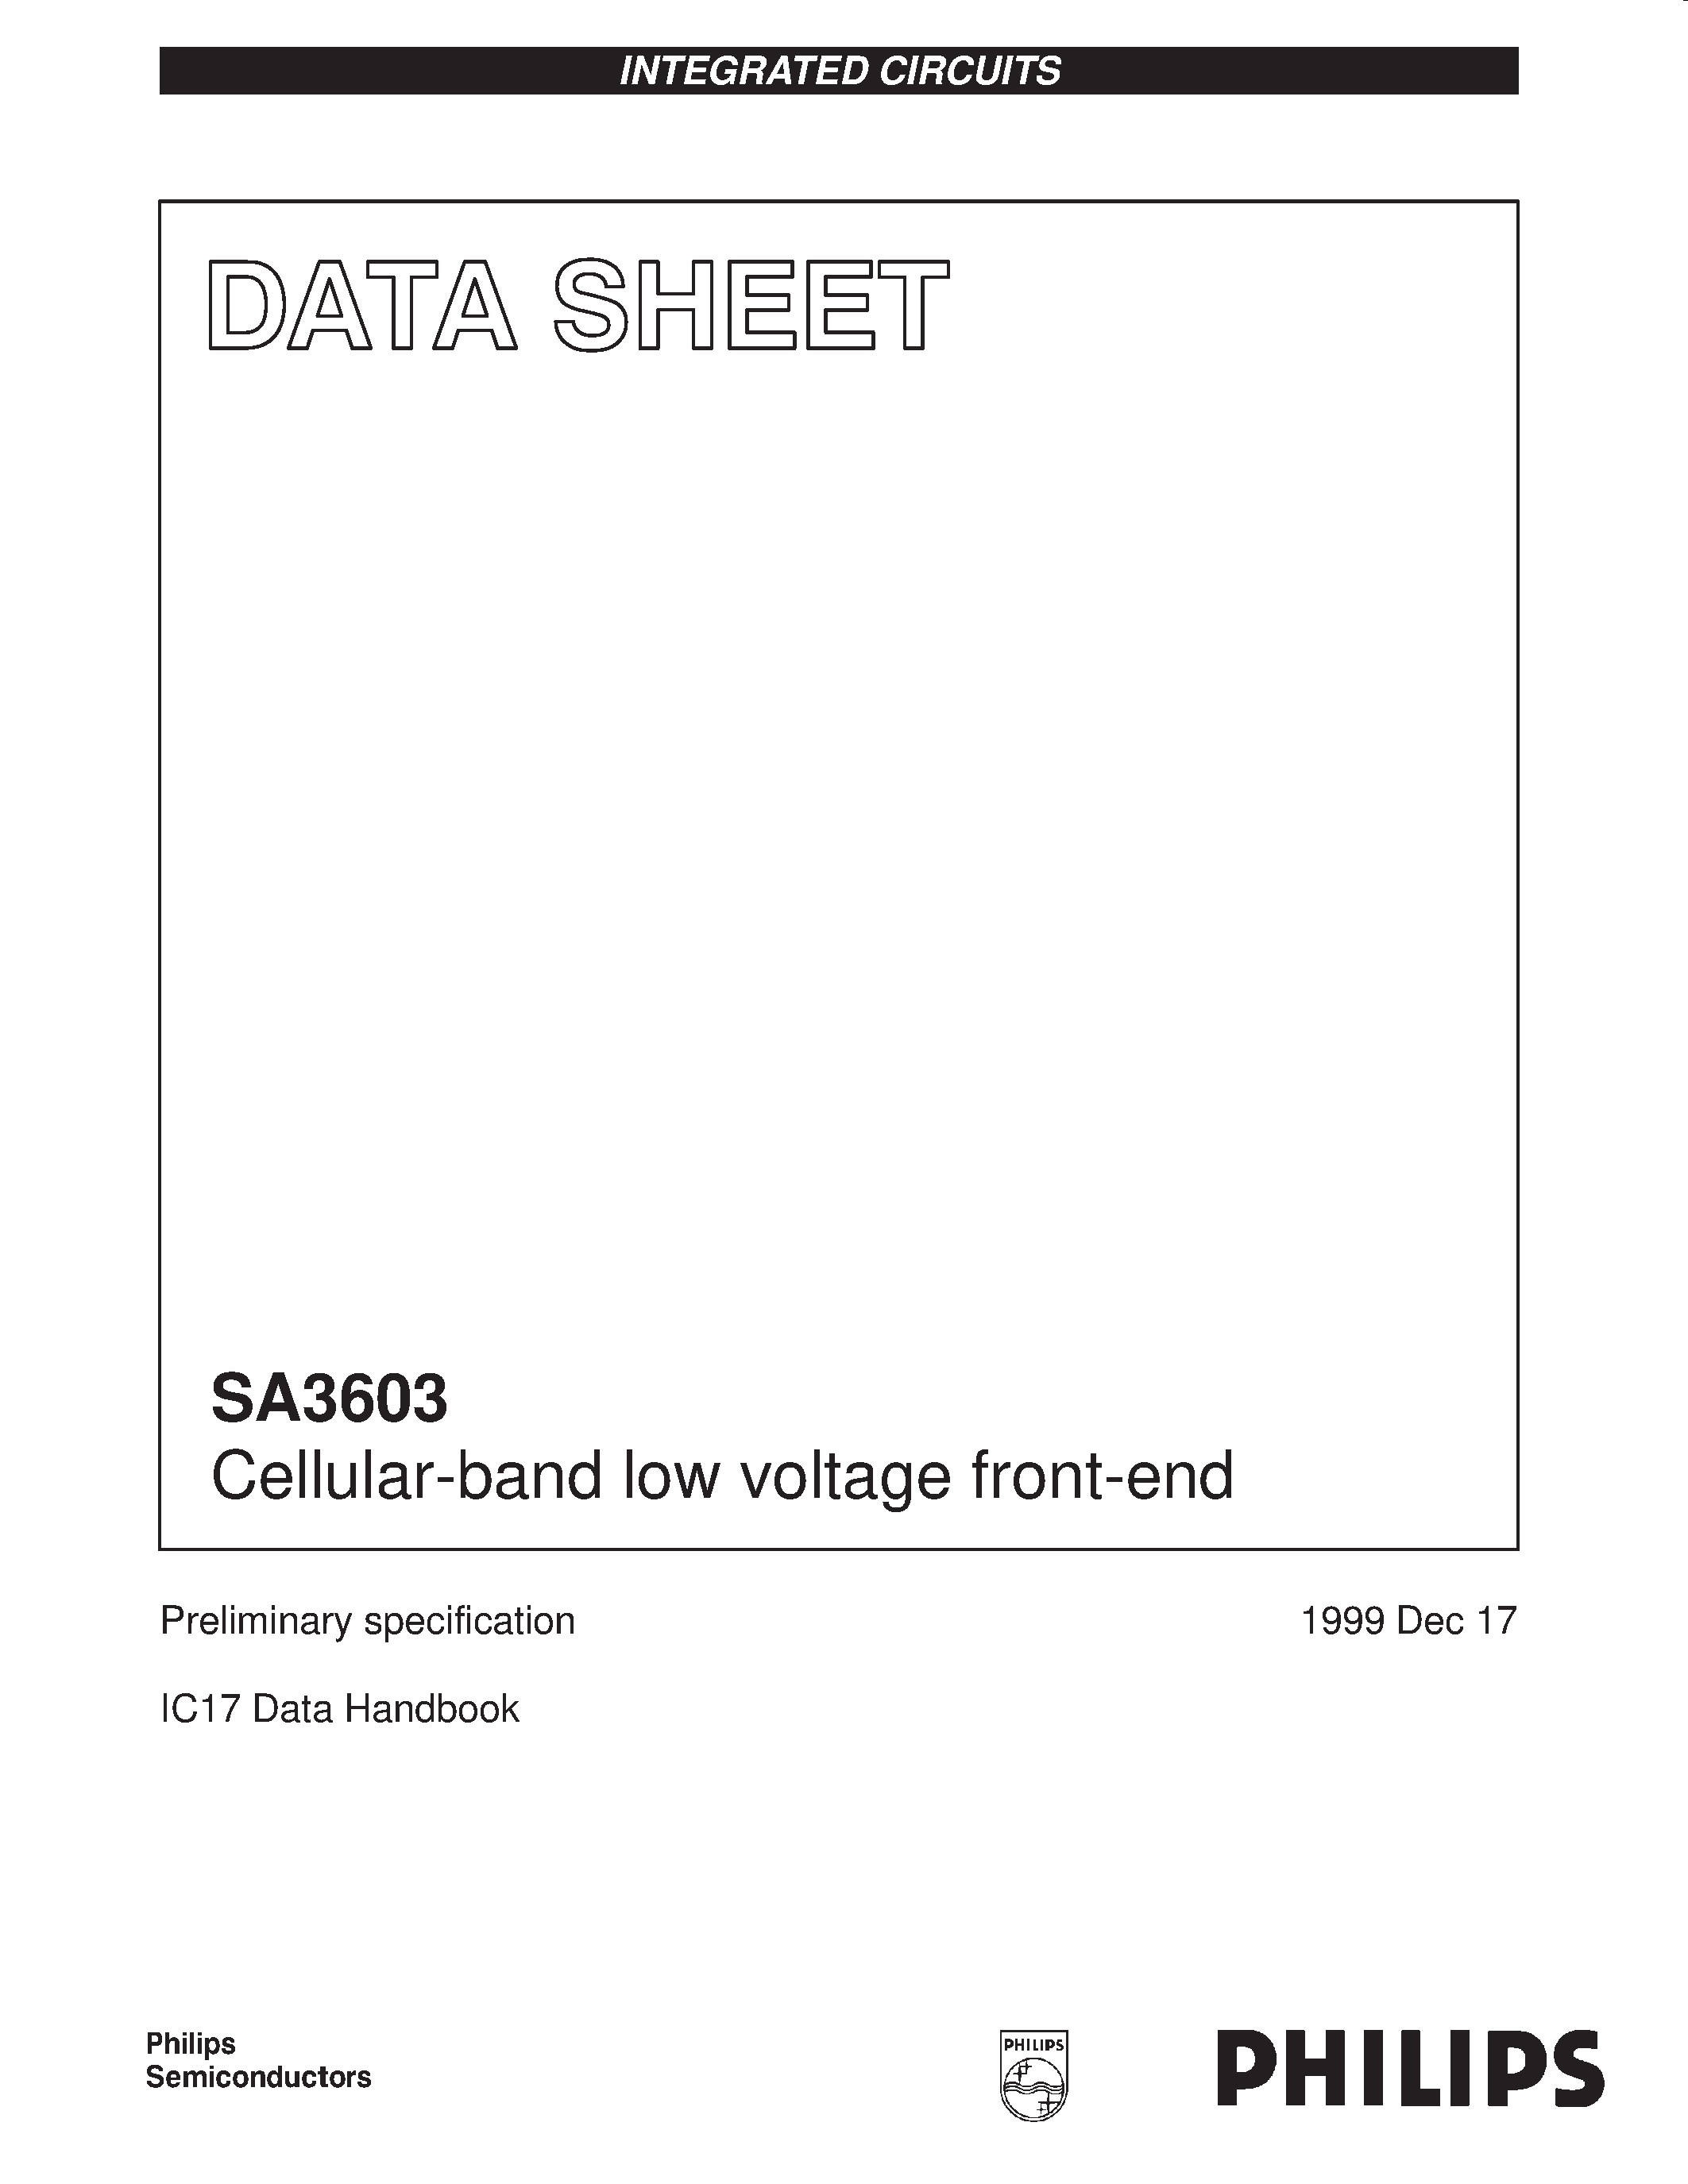 Даташит SA3603 - Cellular-band low voltage front-end страница 1